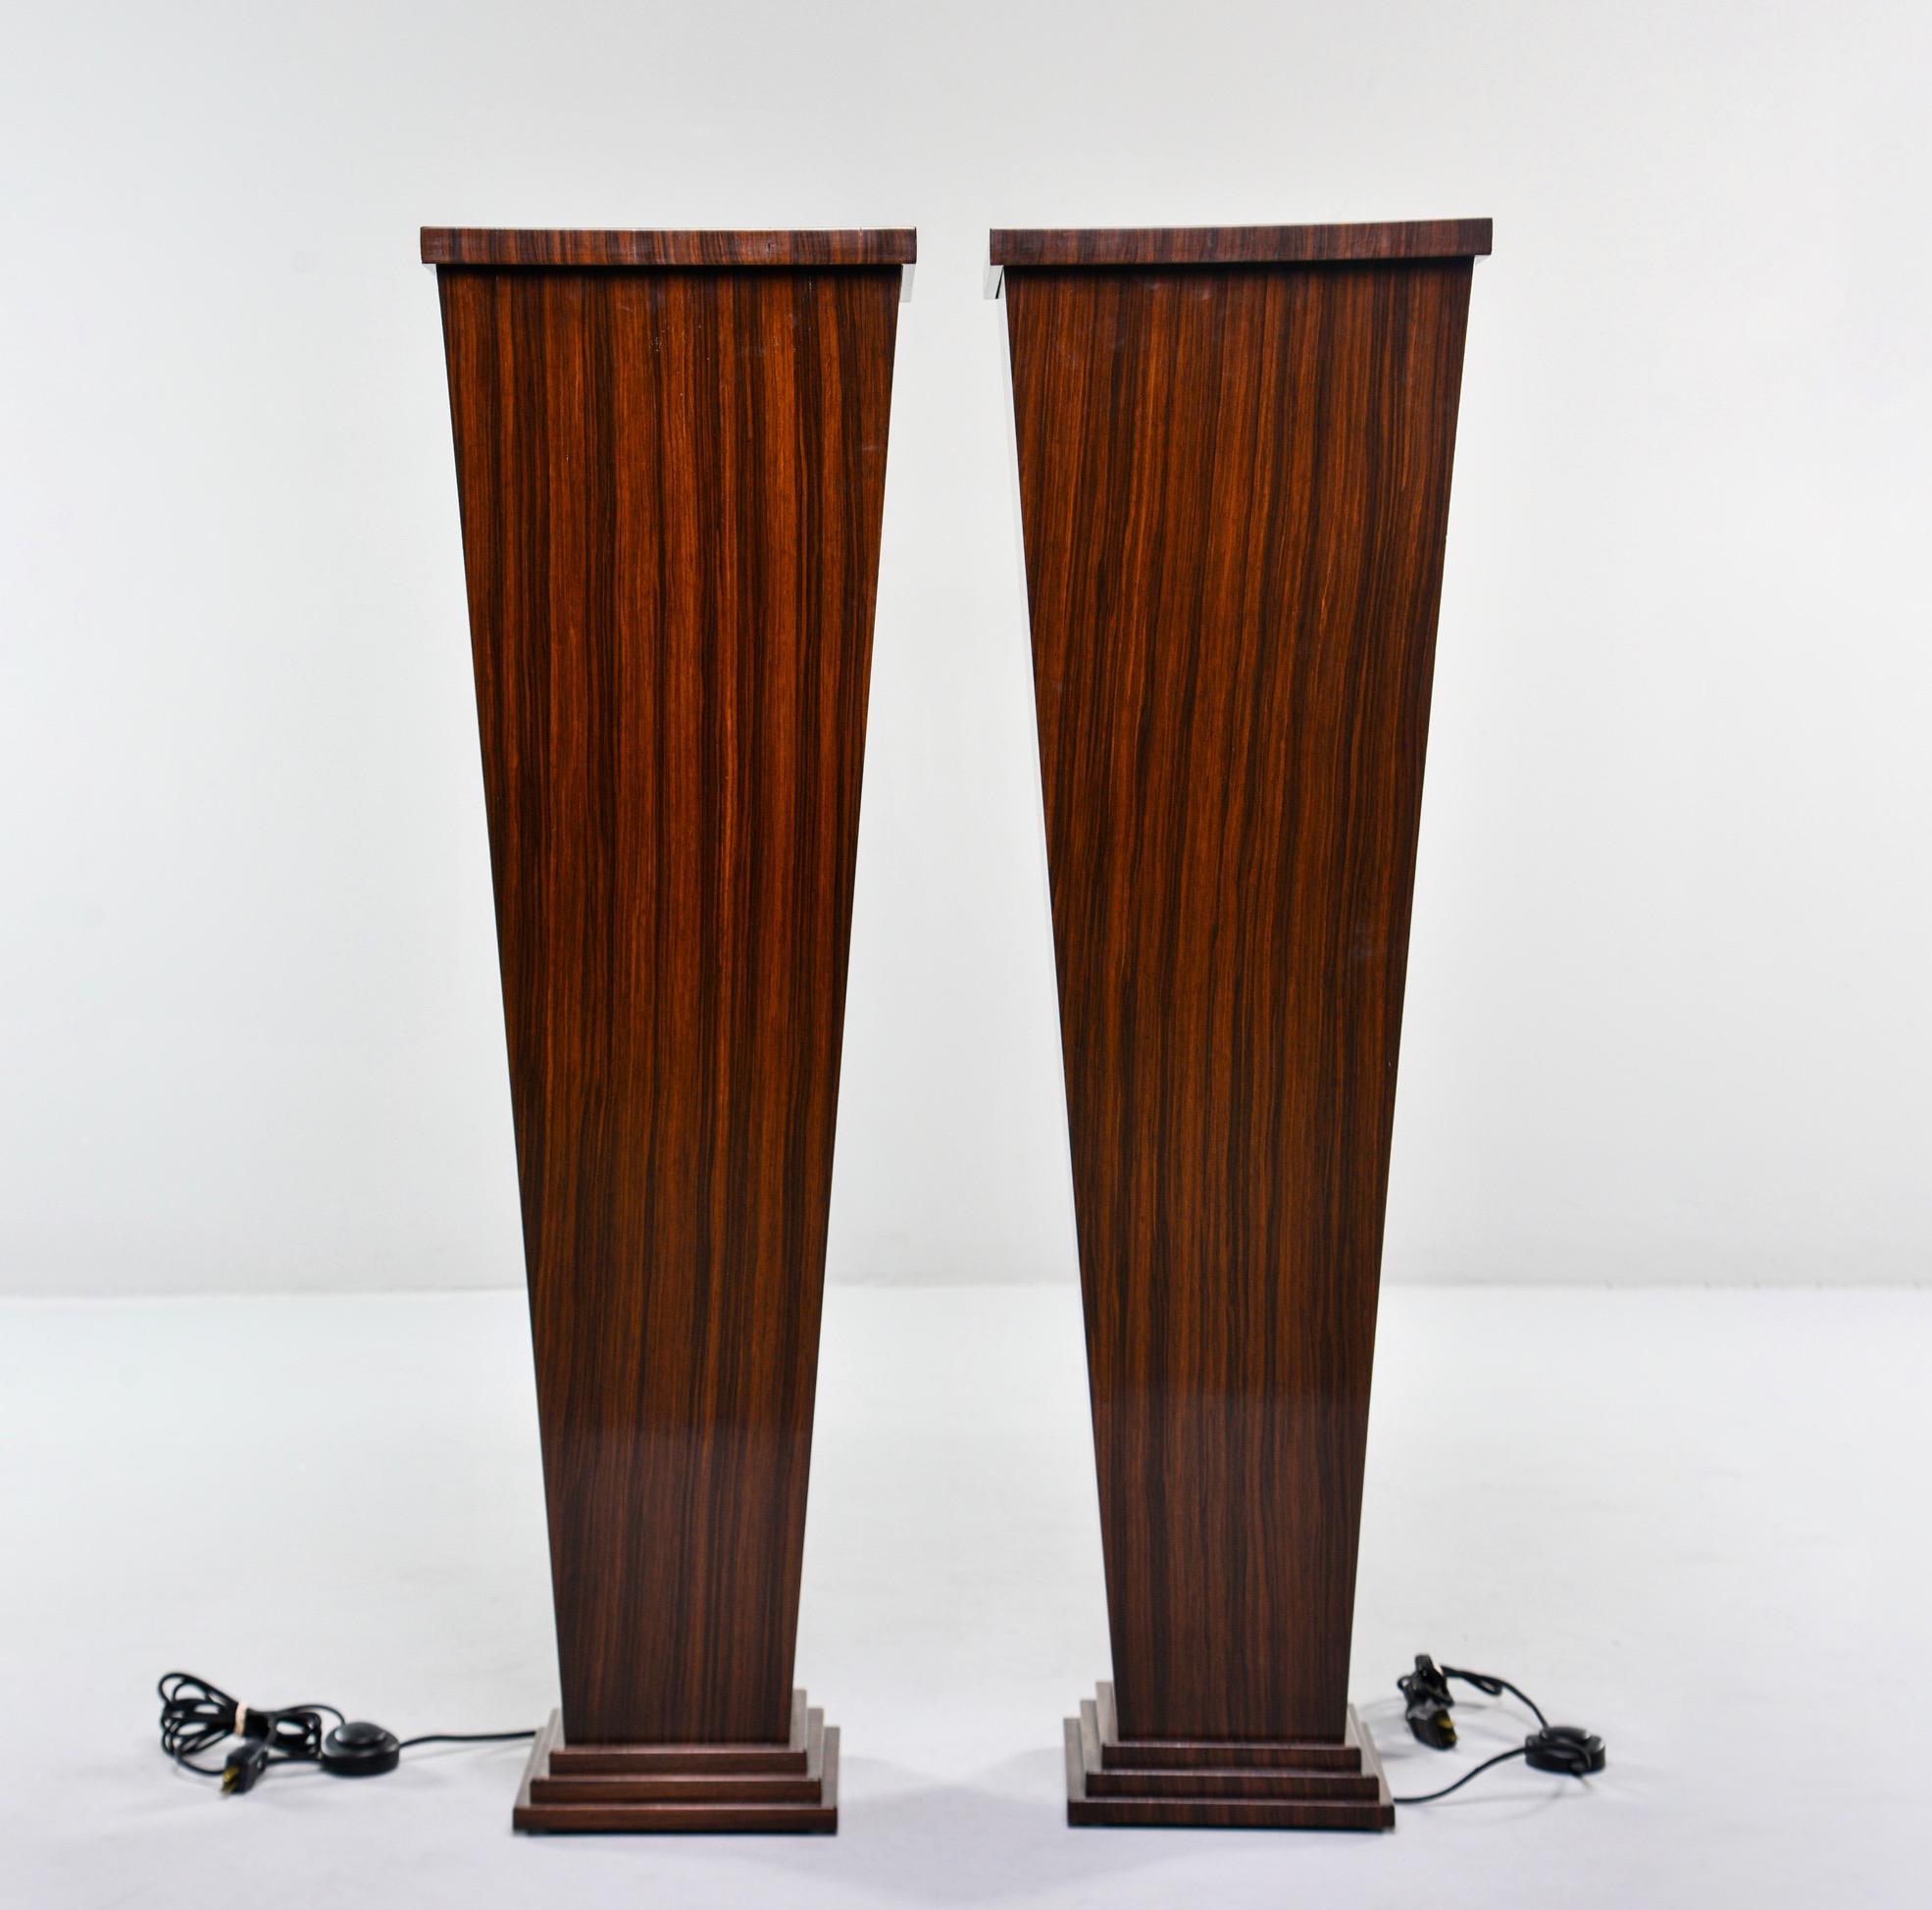 Custom made for us in England, this pair of tall display stands feature richly figured walnut veneers with an interior standard-sized light socket and glass inserts at top so that displays can be lit from underneath. Great for displaying art glass